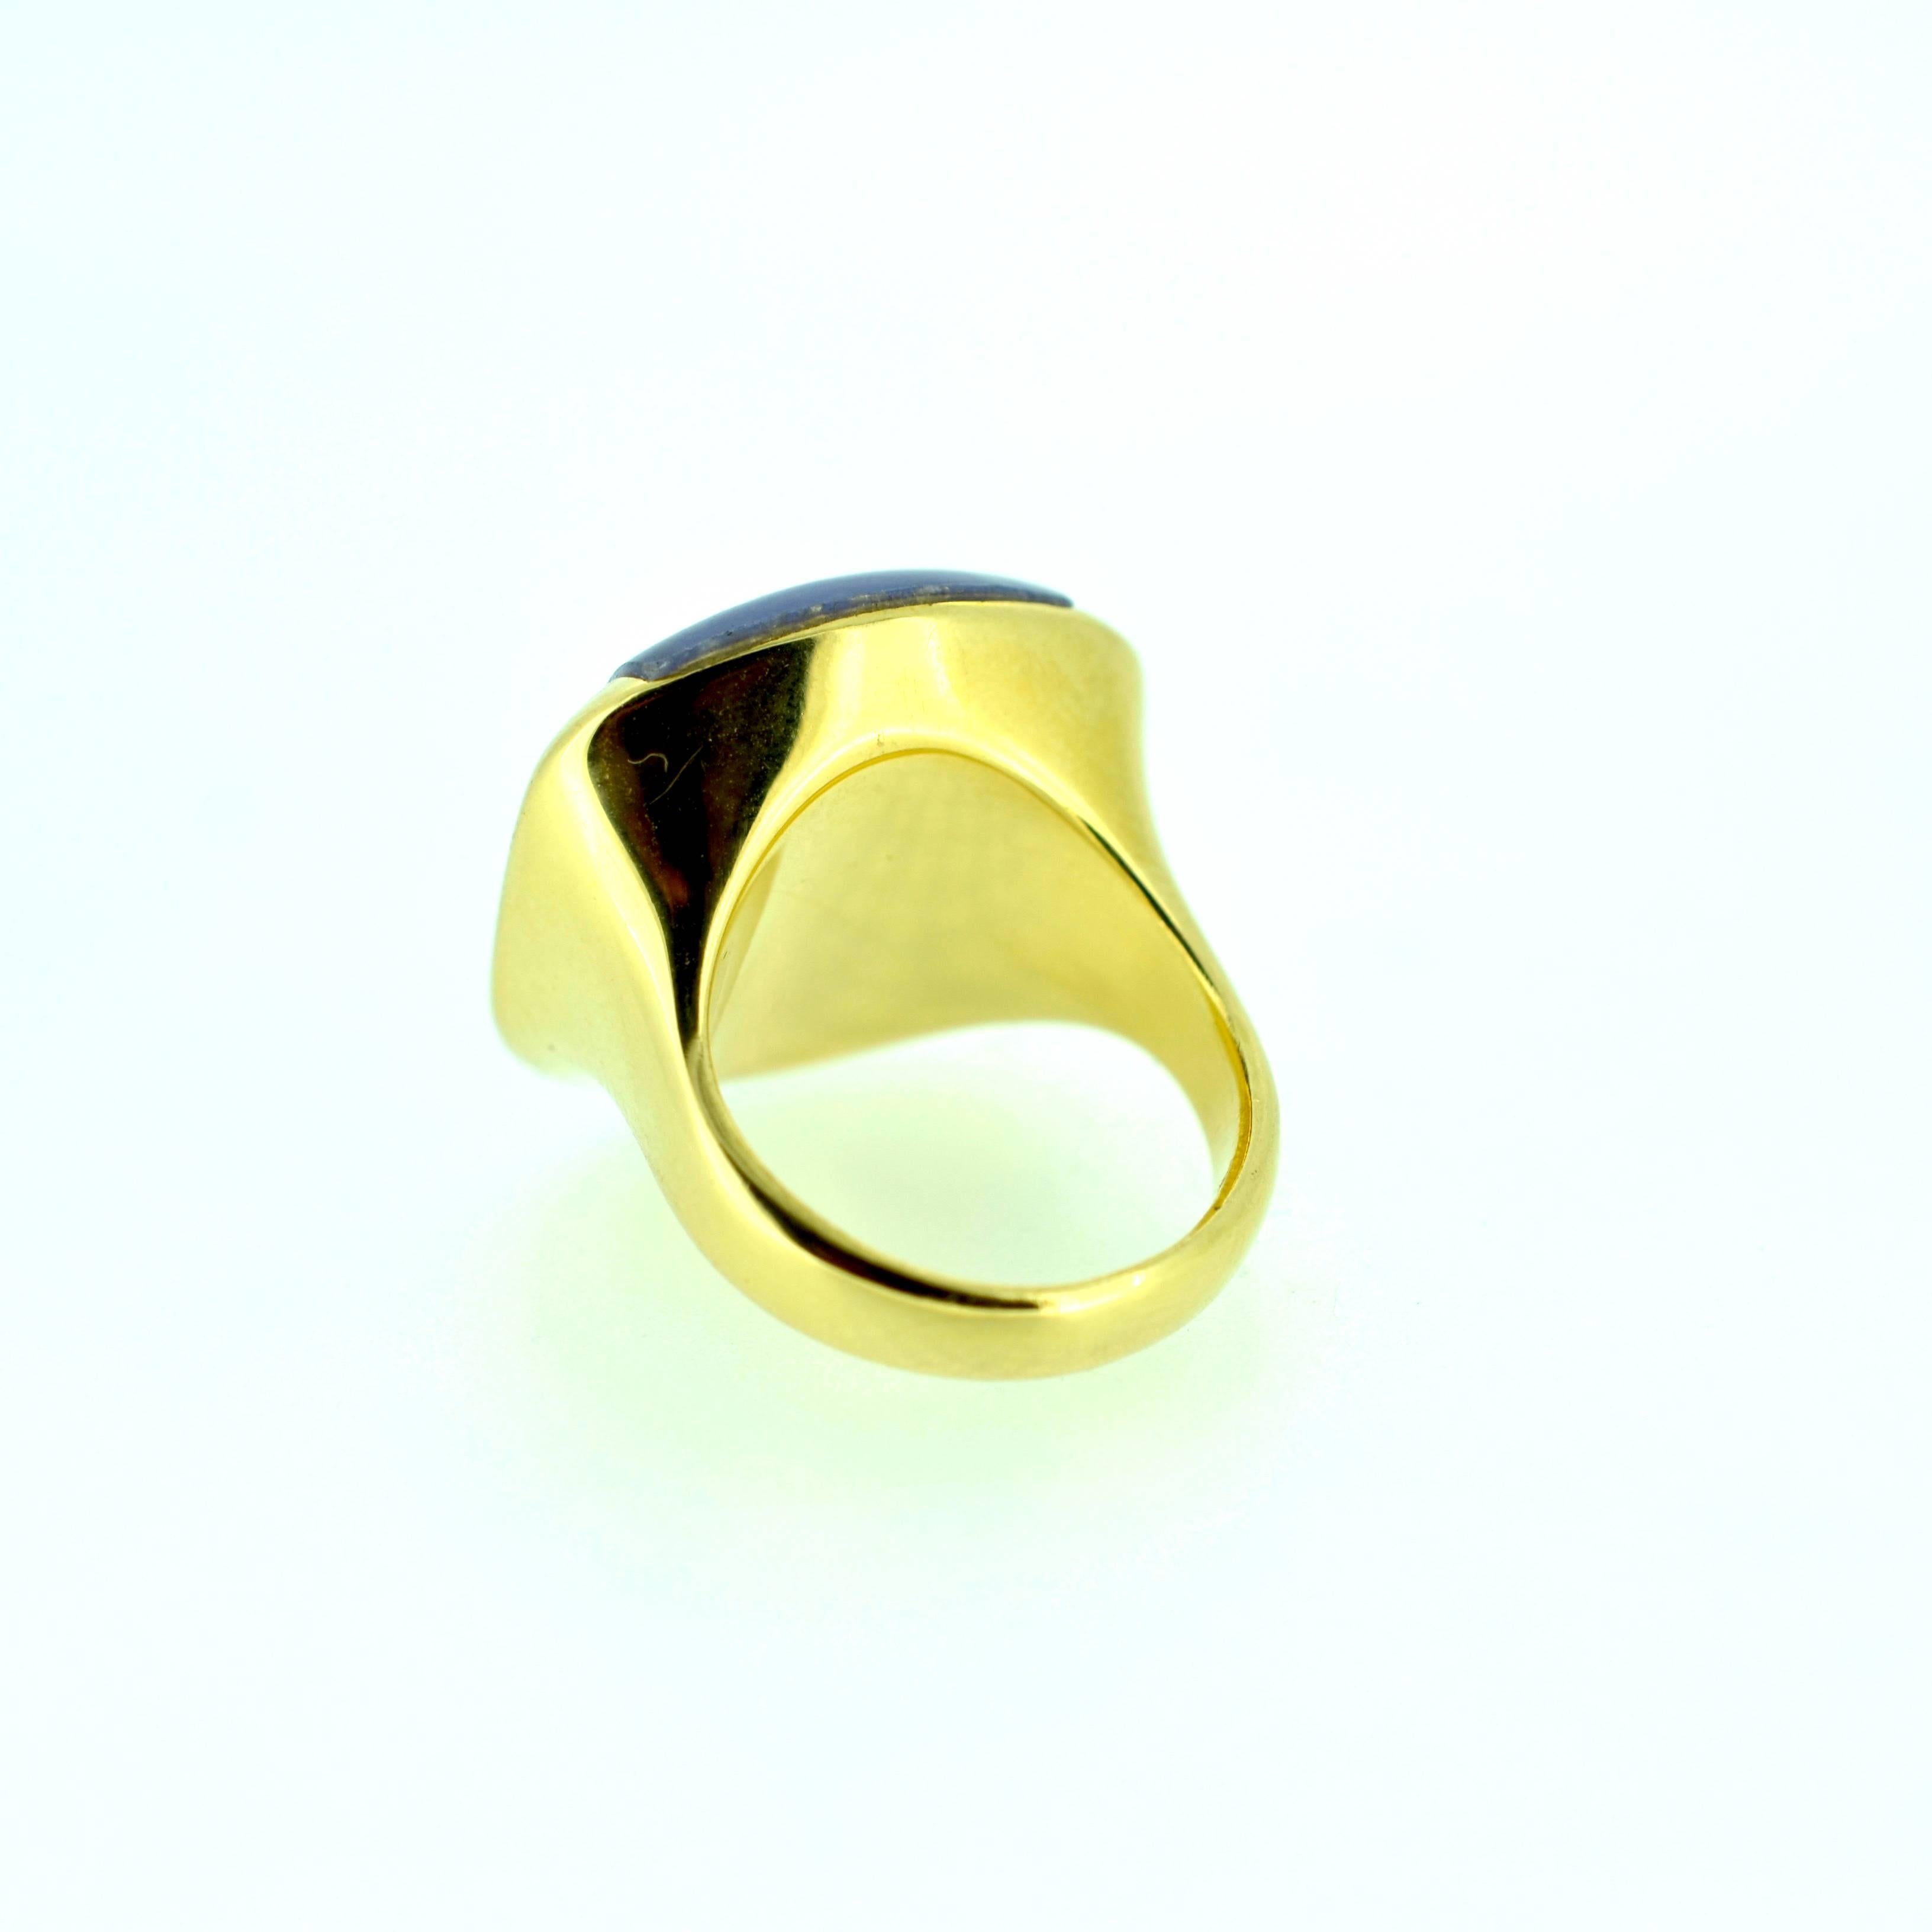 Lavender Jade 18kt yellow gold ring: Contemporary design, wax carved and cast in solid 18kt yellow gold base and shank. Jade is softly domed23X16mm soft rectangular shape and bezel set on the sides. Ring weighs 14.3 DWT.